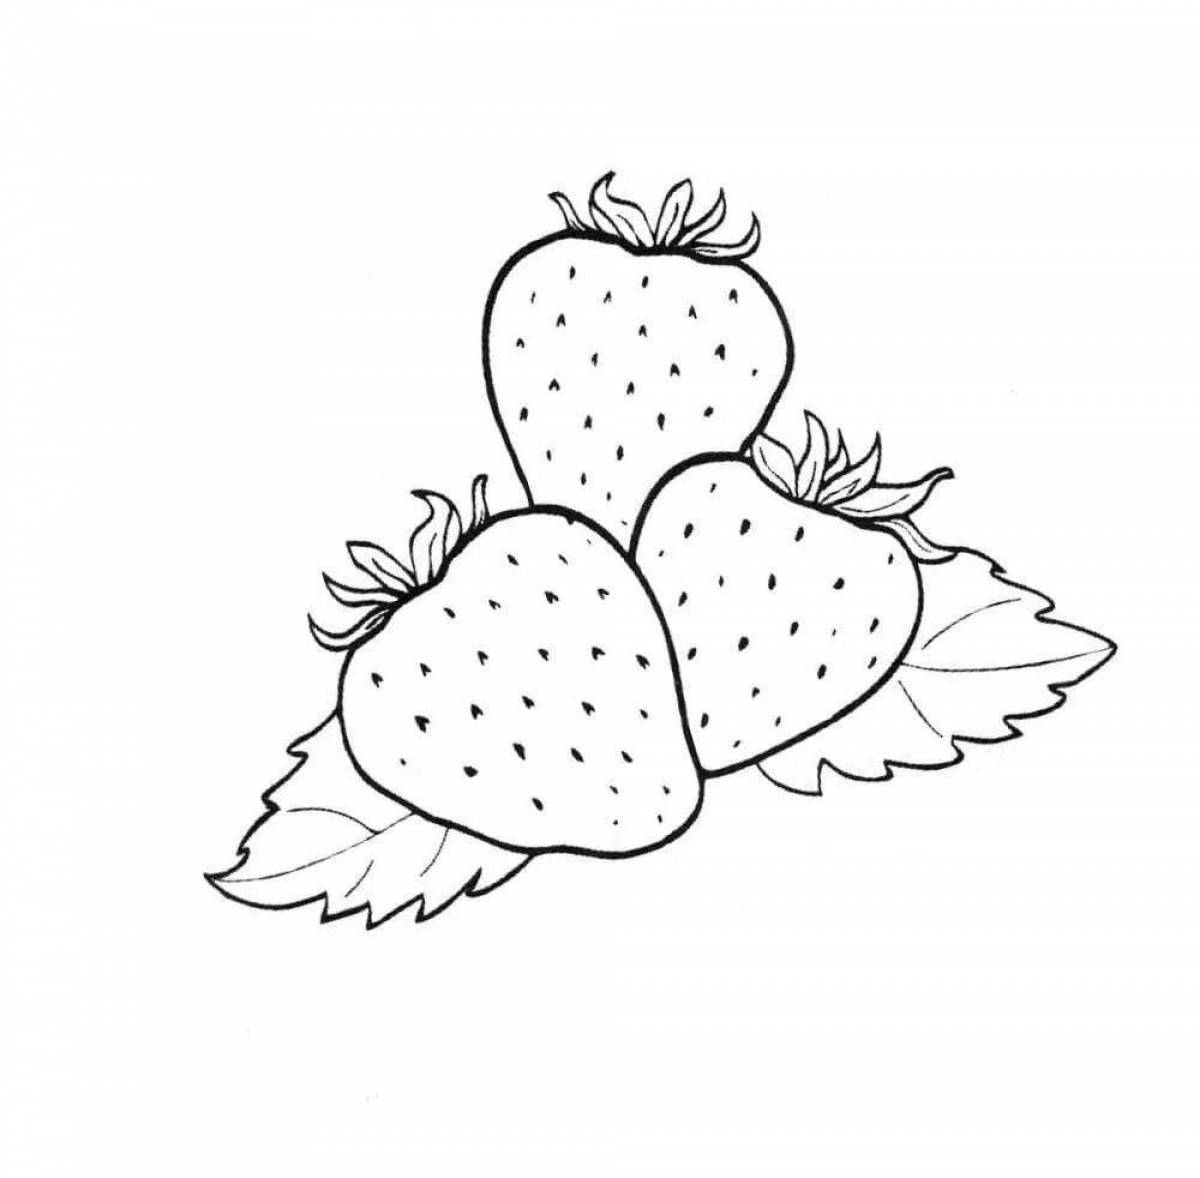 Strawberry playful coloring game